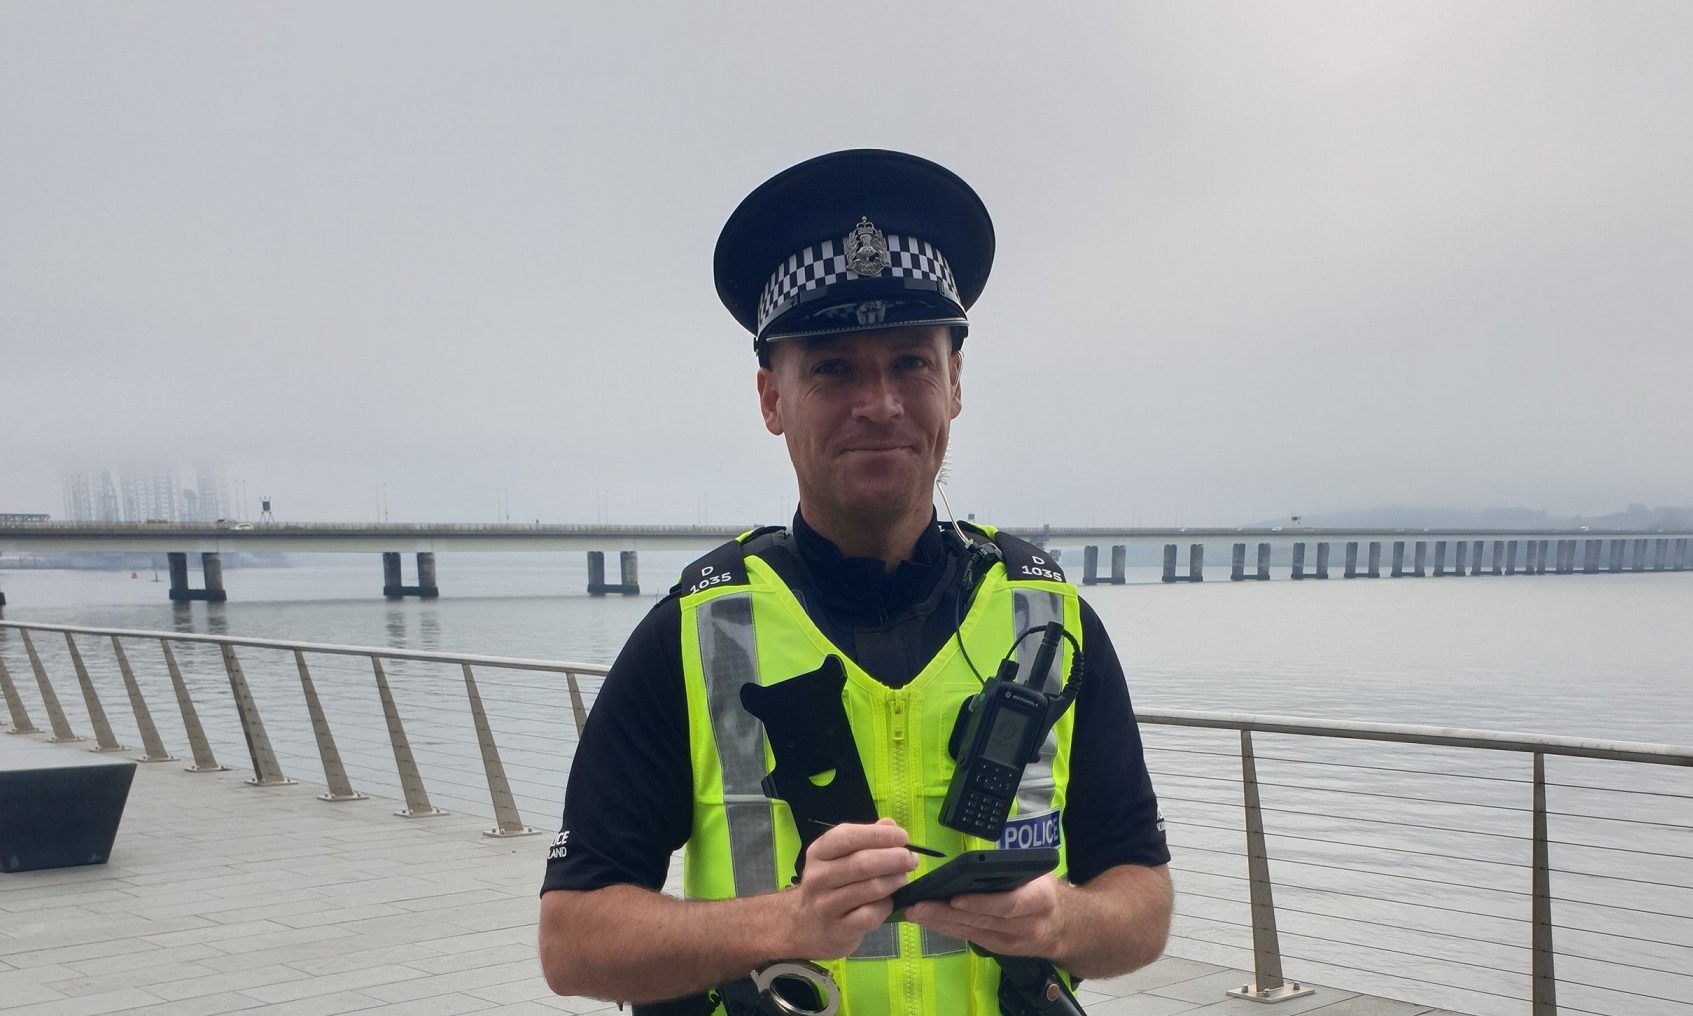 Tayside-based PC Garrie Watson using a mobile device